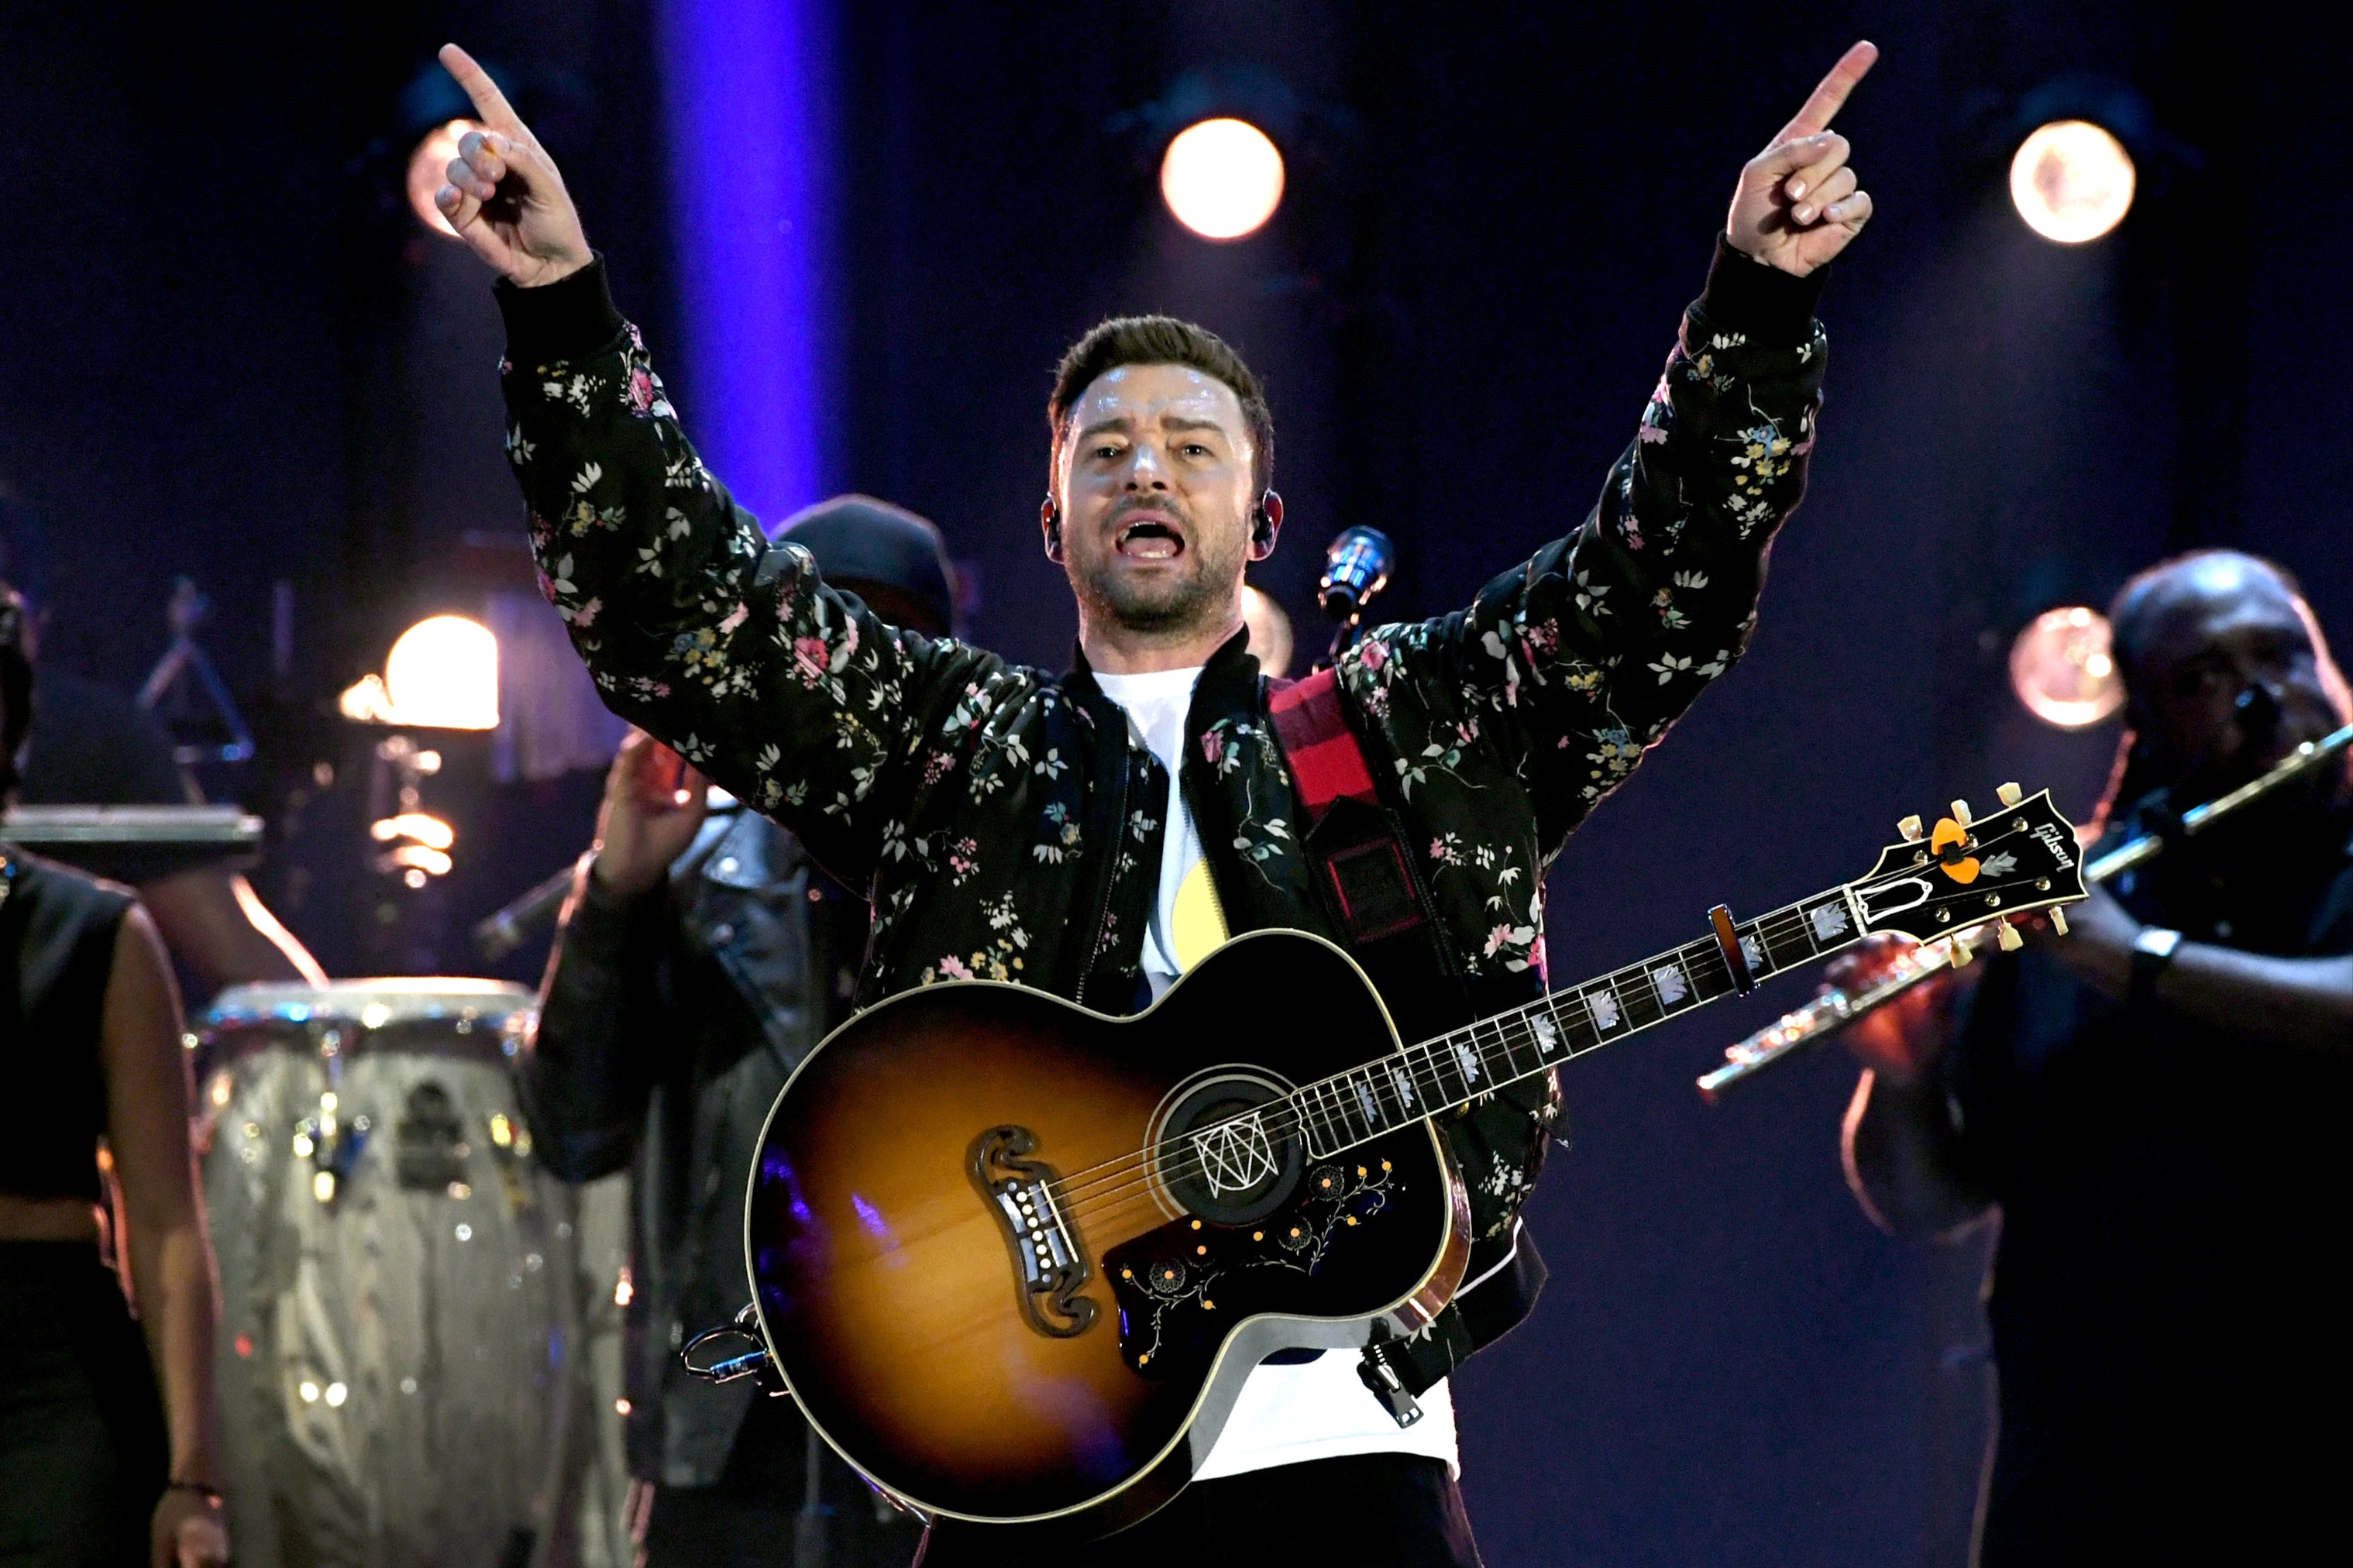 Justin Timberlake was arrested on a DWI charge in the Hamptons. He is due back in court on July 26.